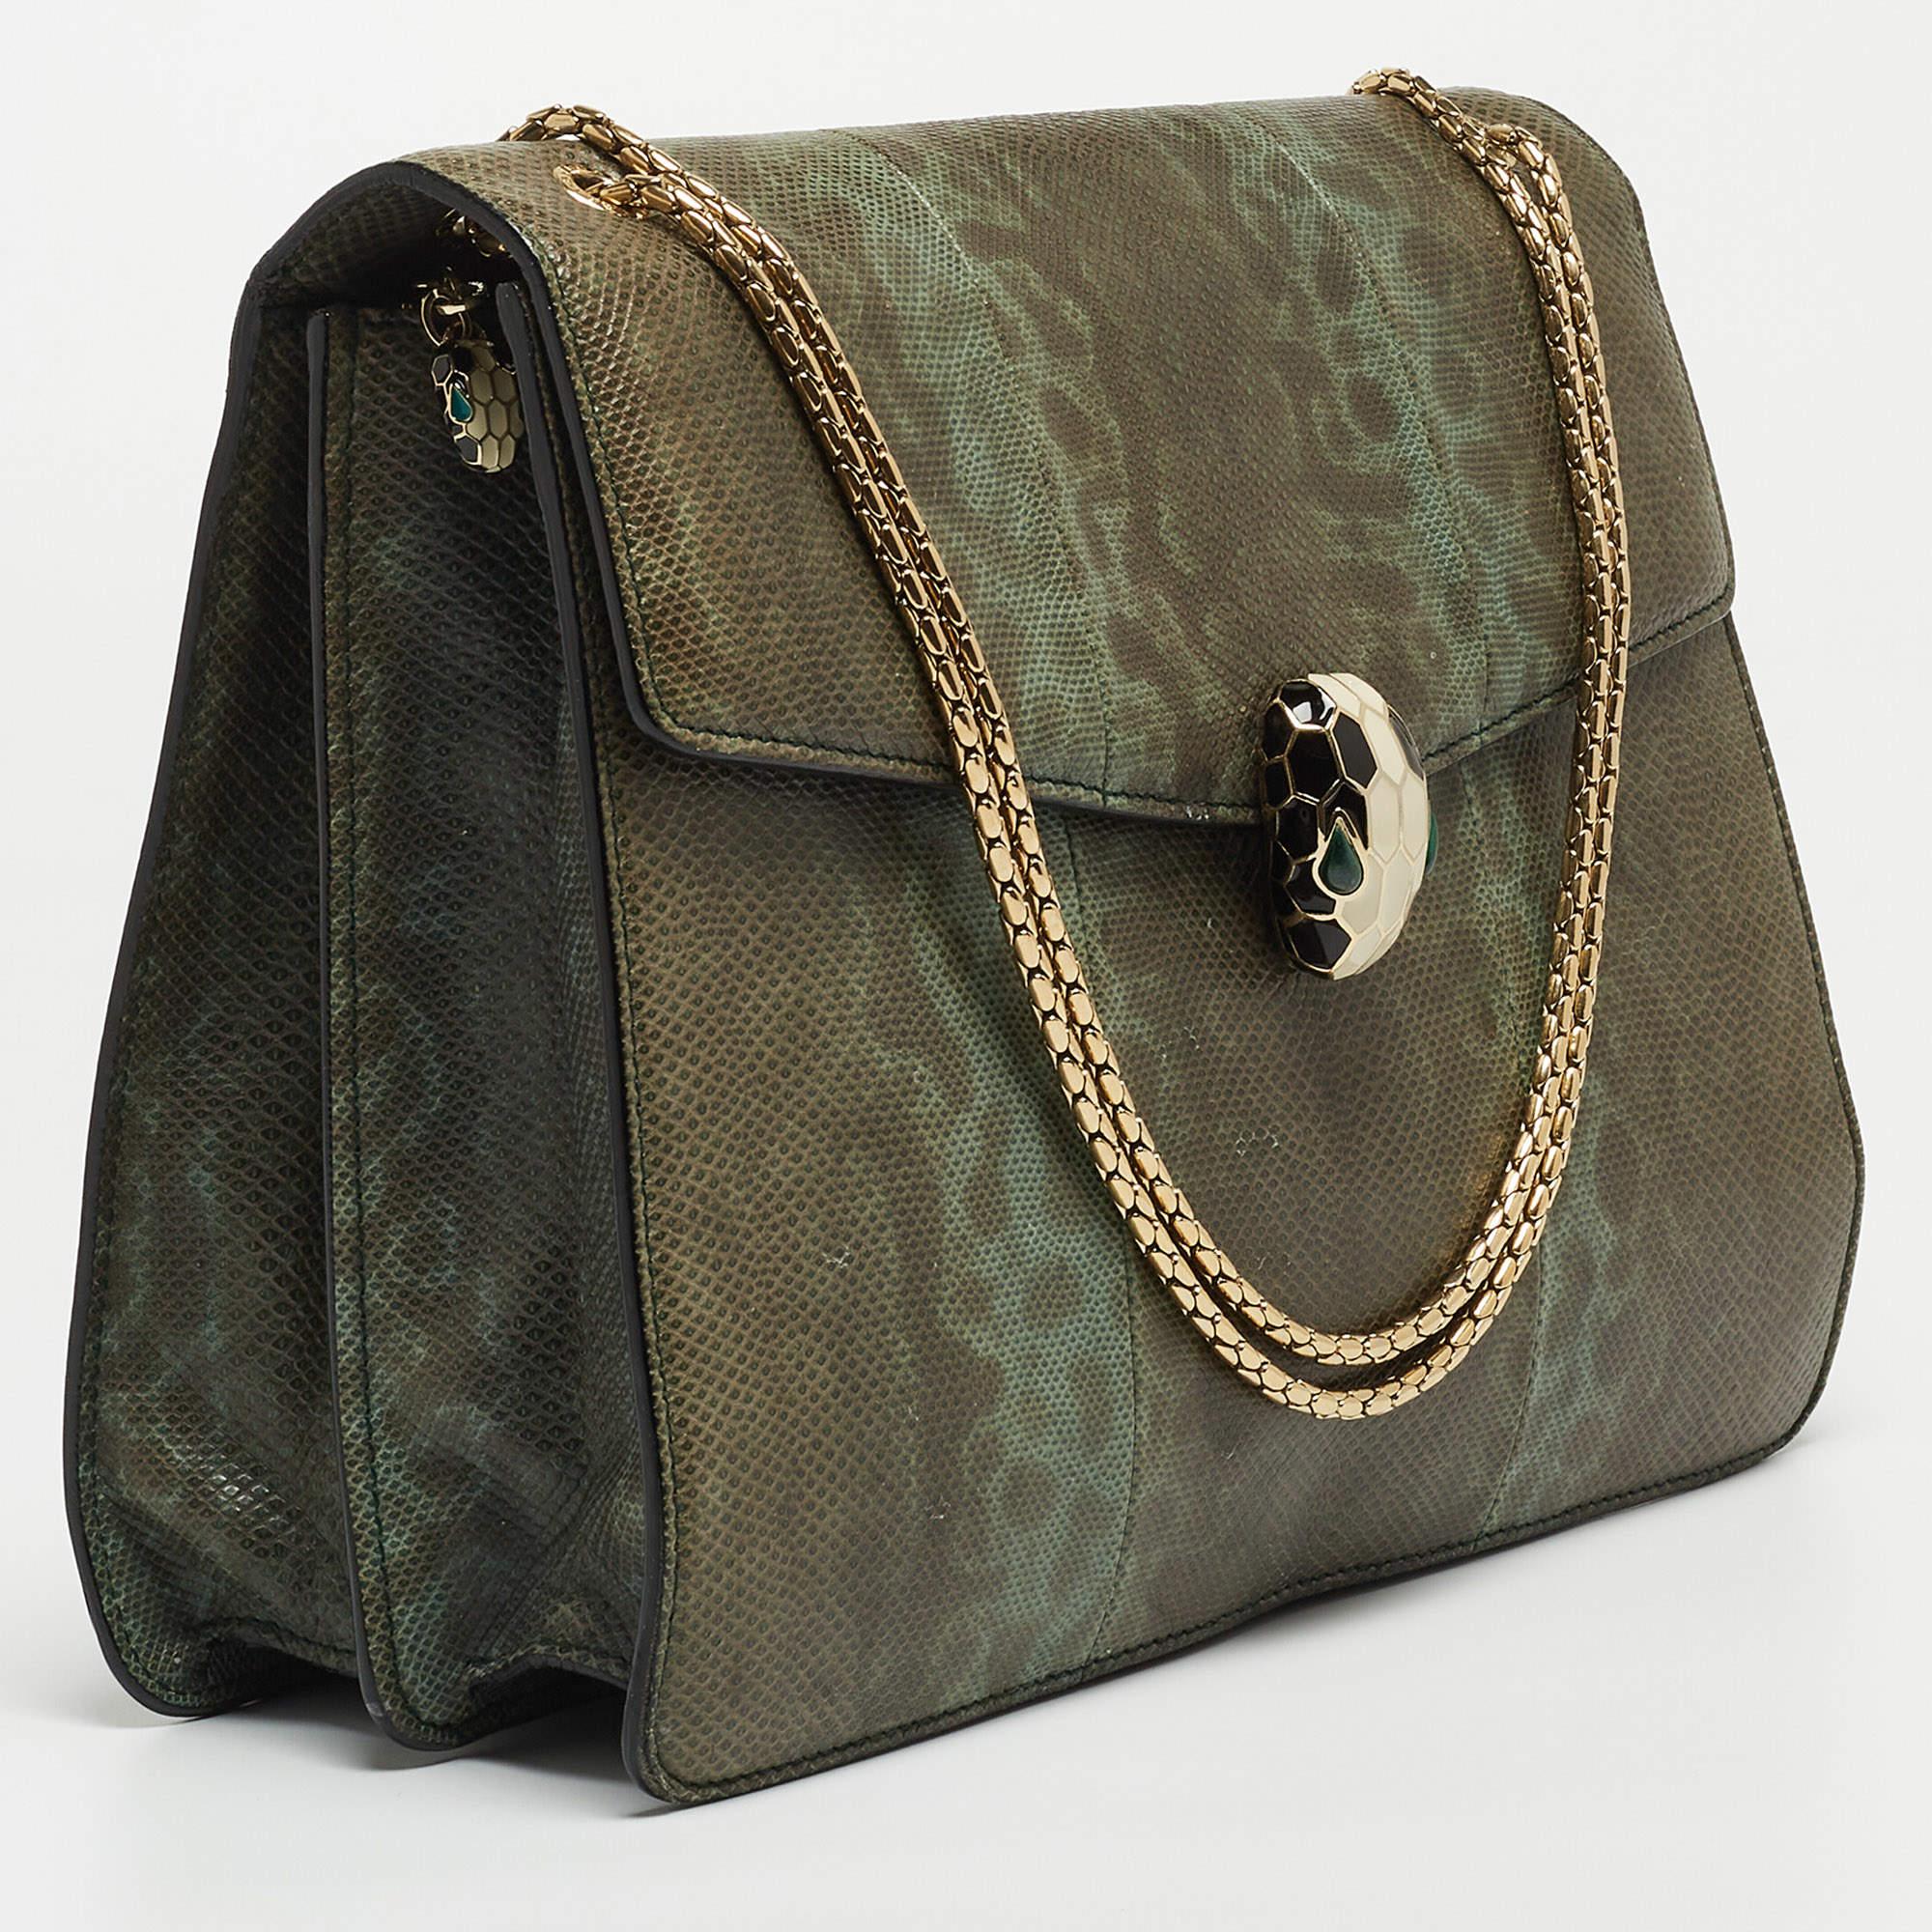 The fashion house’s tradition of excellence, coupled with modern design sensibilities, works to make this Serpenti Forever bag one of a kind. It's a fabulous accessory for everyday use.

